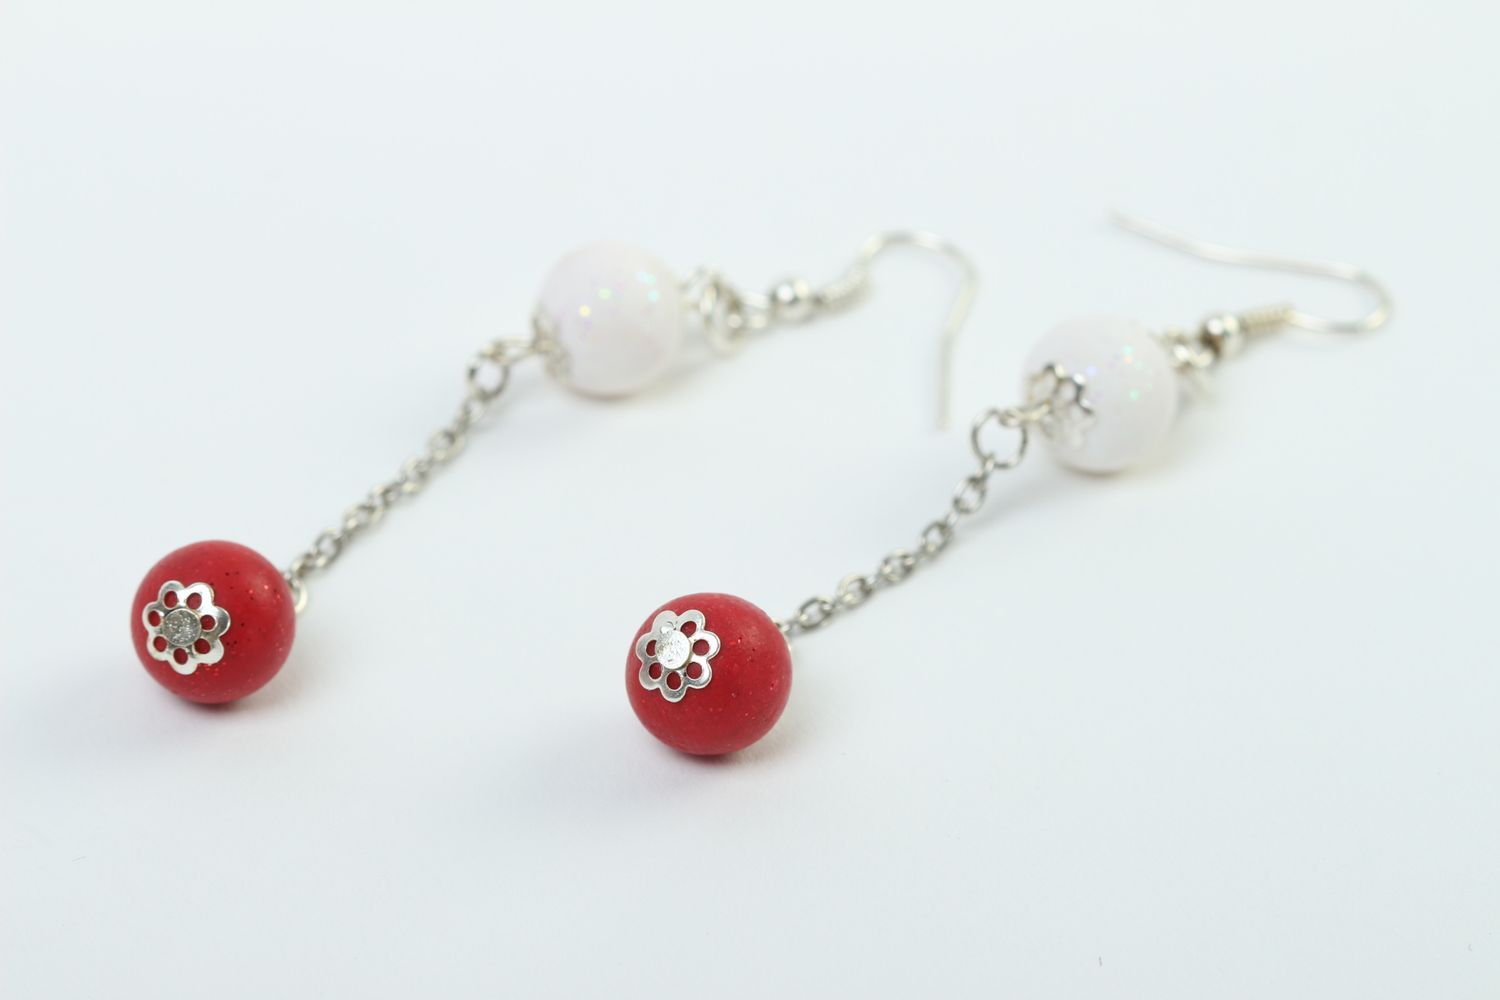 Handmade earrings for kids childrens accessories stylish earrings with charms photo 3